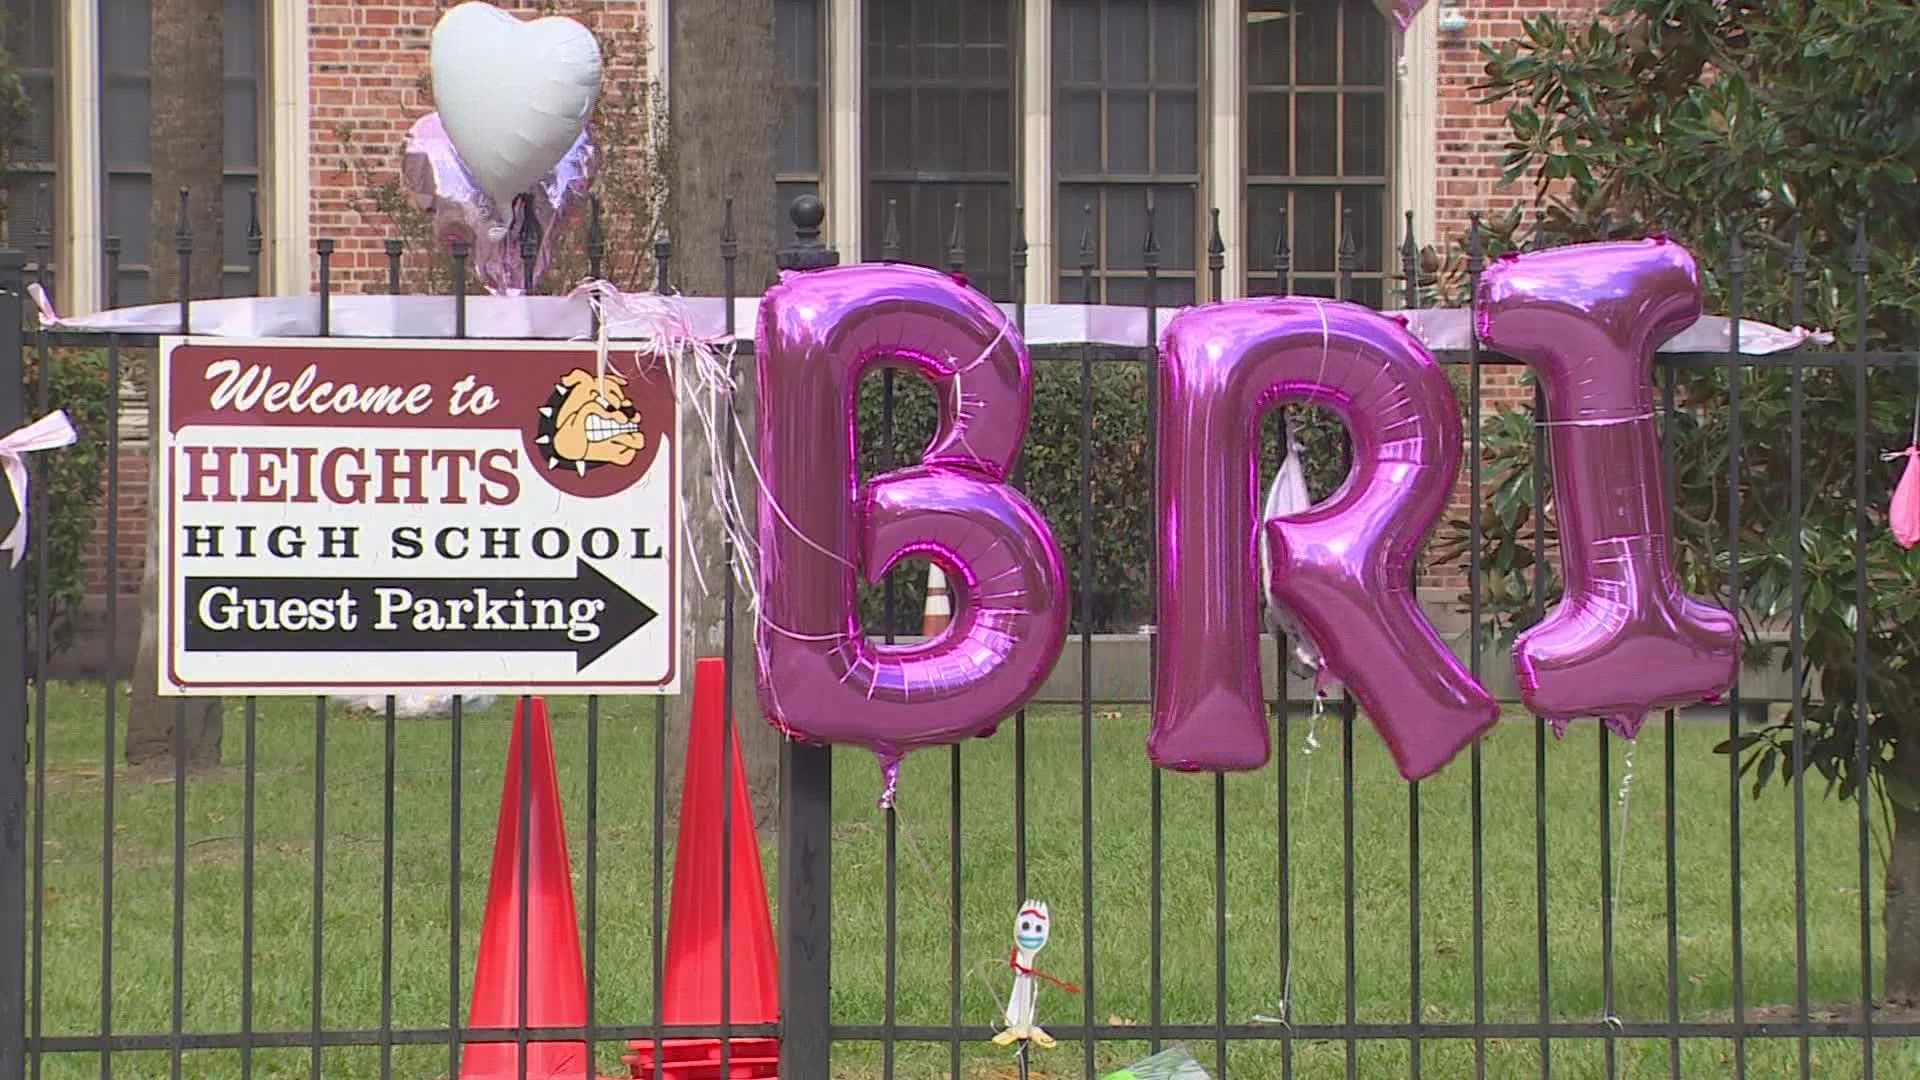 Brianna Rodriguez was 16. She loved to dance. On Wednesday, her classmates and members of the community came together to honor her memory.